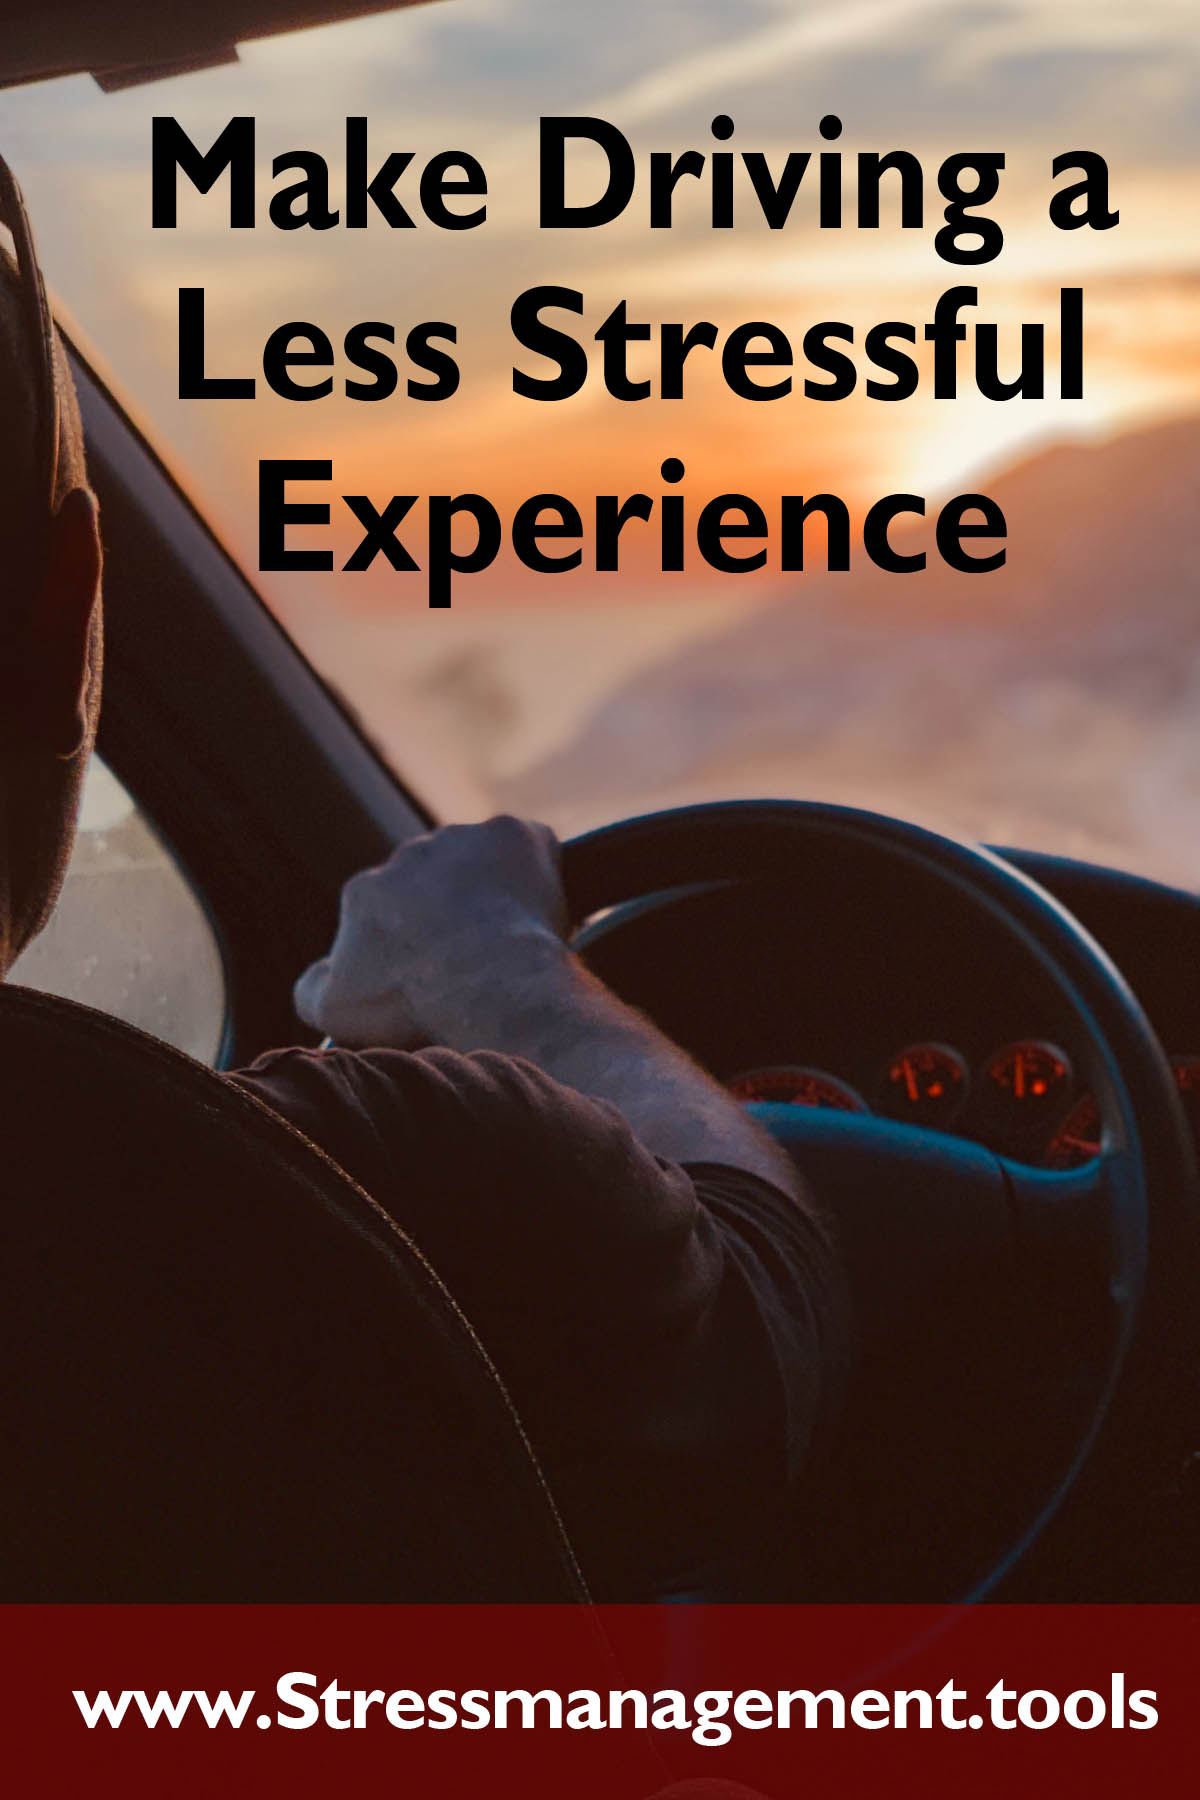 Make Driving a Less Stressful Experience